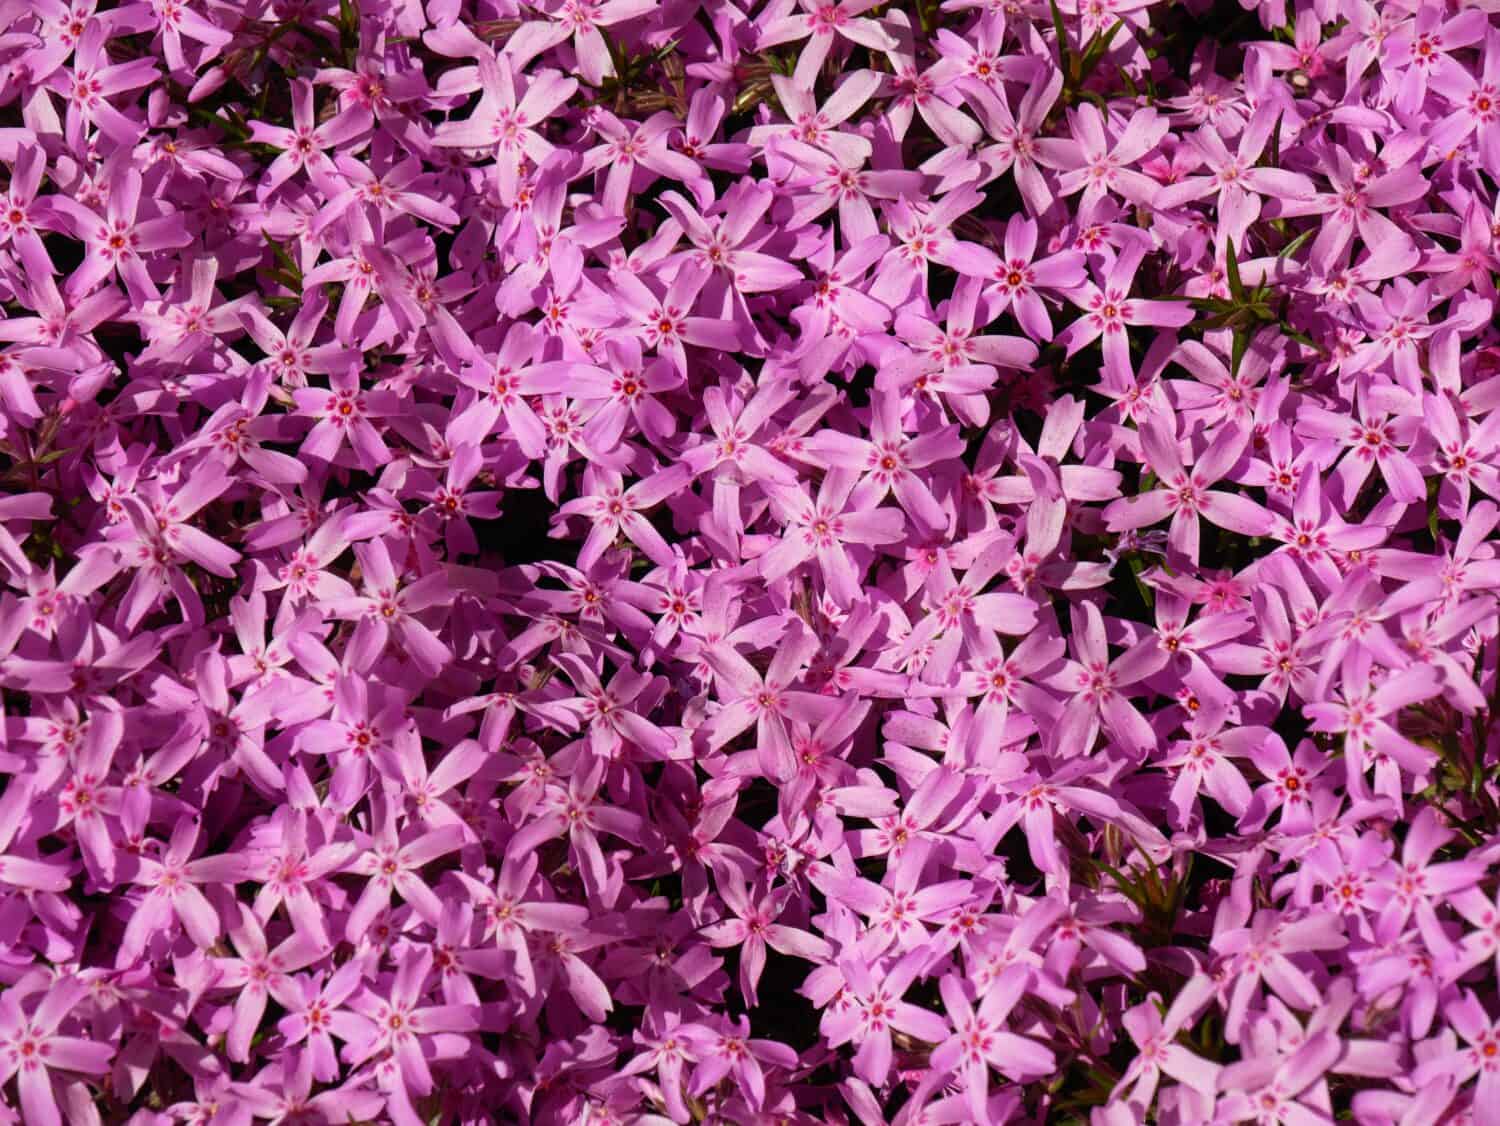 Pink miniature creeping phlox (Phlox stolonifera) form bright living carpet. Excellent view for design and wallpaper. Abstract backdrop. Top view.